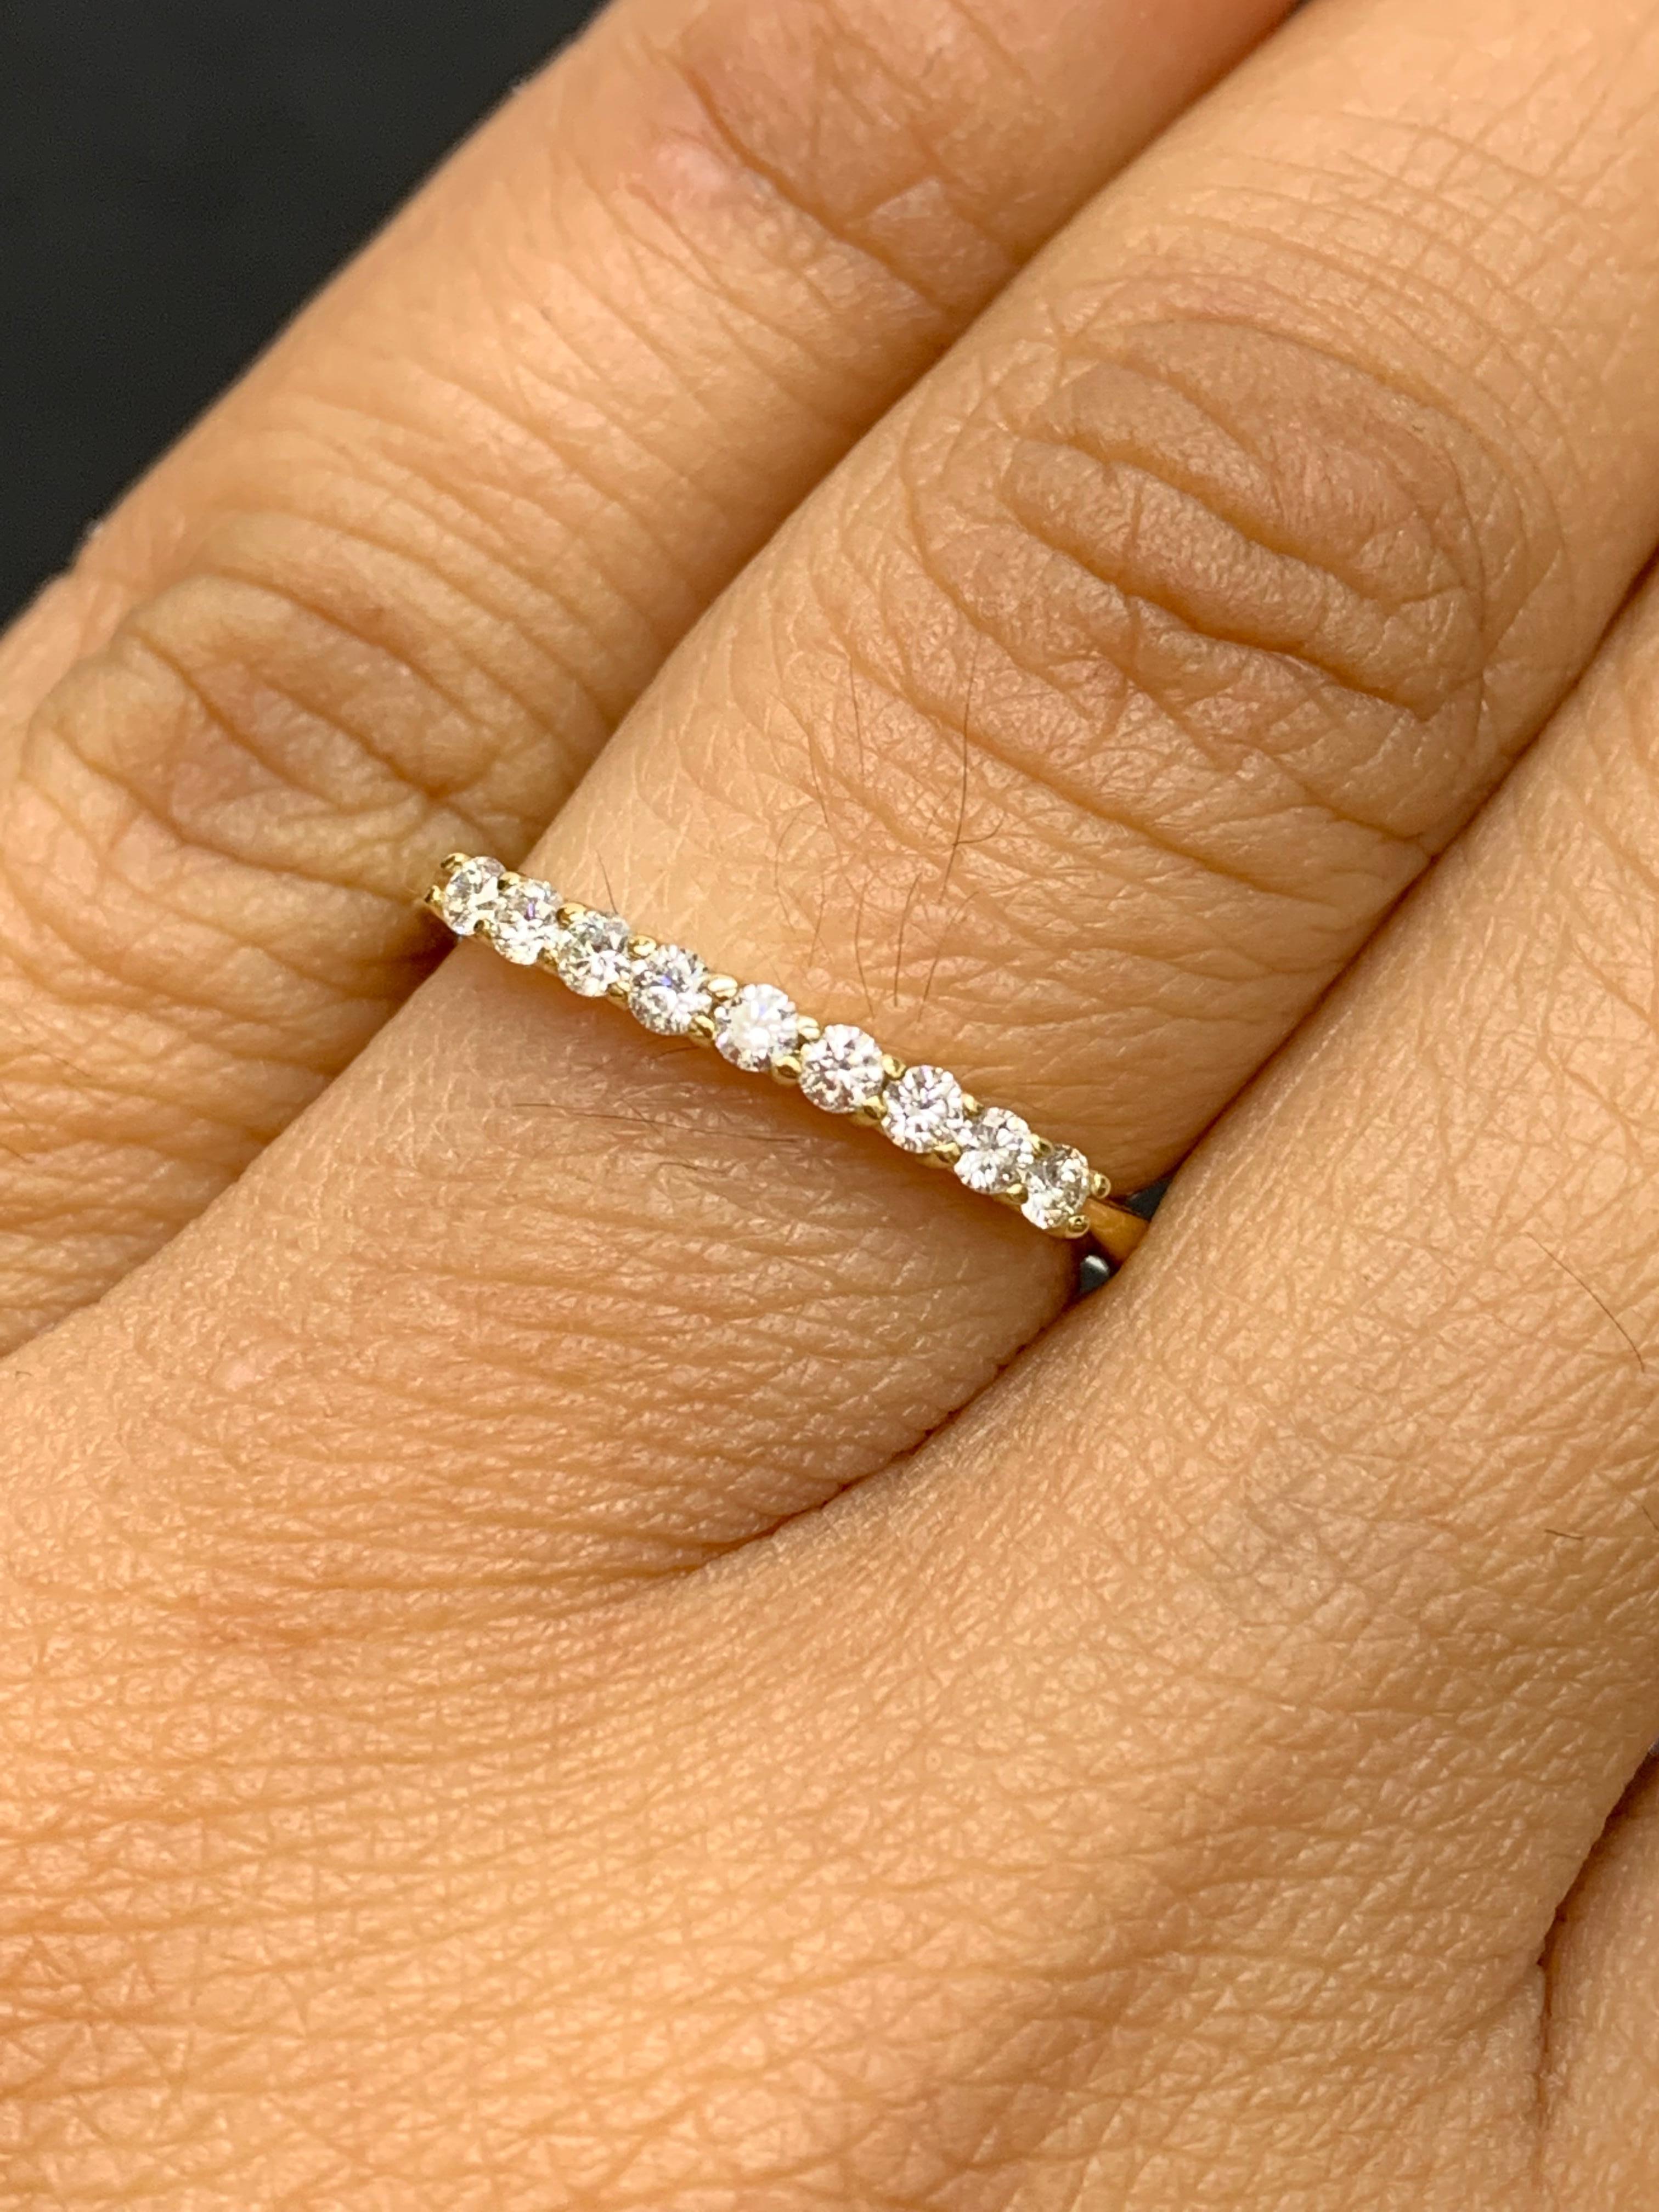 A fashionable and classic wedding band showcasing 9 brilliant cut diamonds weighing 0.23 carats total. Stones are secured with a shared prong setting made with 14 karats yellow gold. A versatile piece that can be worn as a fashionable right-hand